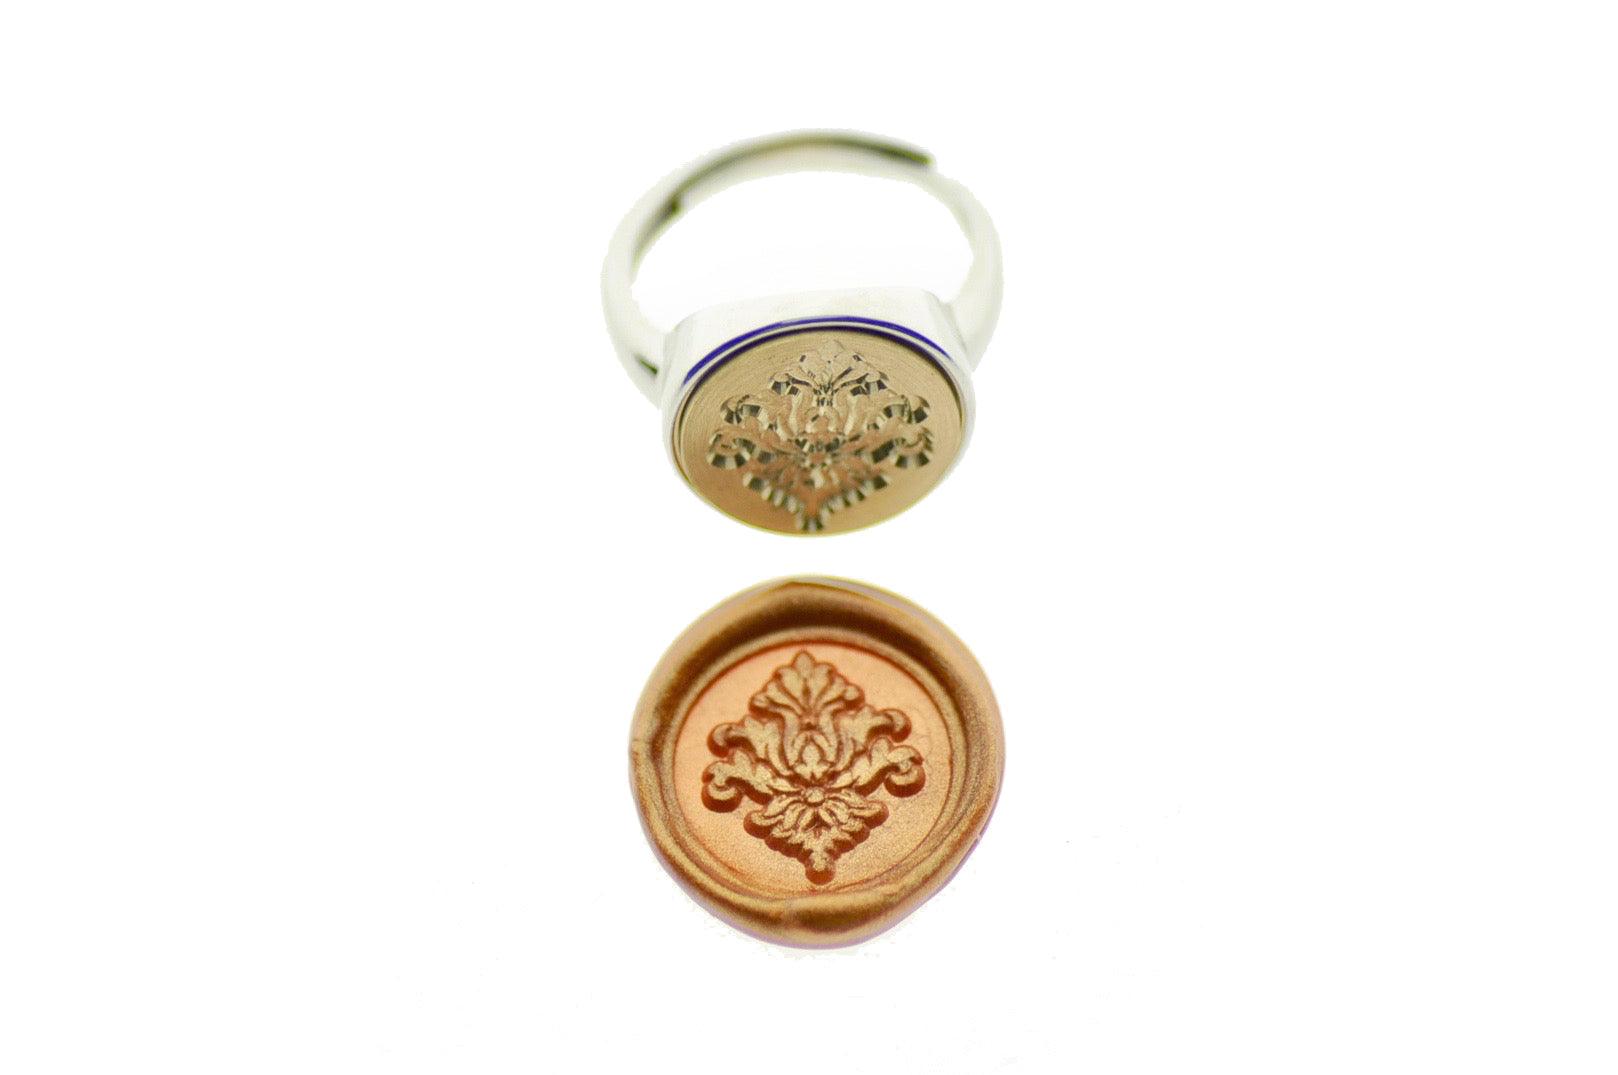 Victorian Filigree Deco Signet Ring - Backtozero B20 - 14m, 14mm, 14mm ring, 14mn, accessory, Deco, Decorative, her, jewelry, minimal, ring, signet ring, simple, size 10, size 7, size 8, size 9, Victorian, wax seal, wax seal stamp